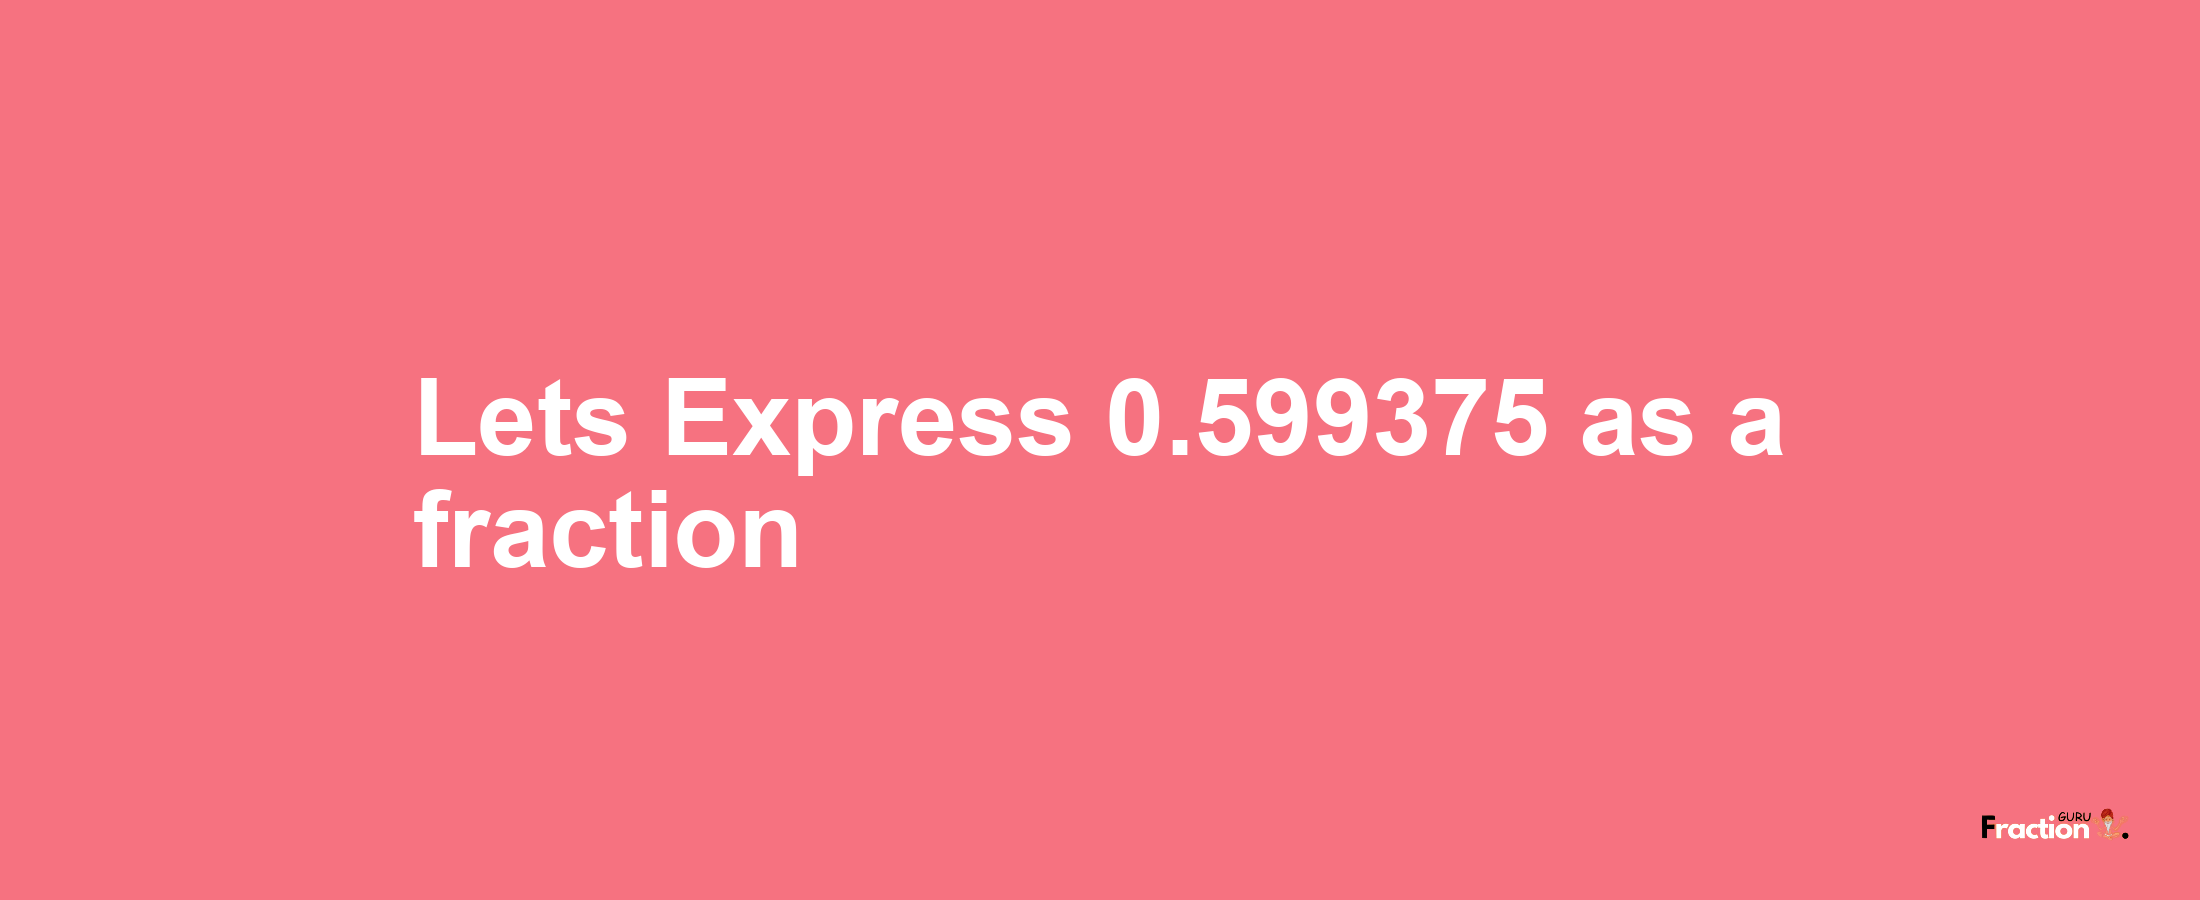 Lets Express 0.599375 as afraction